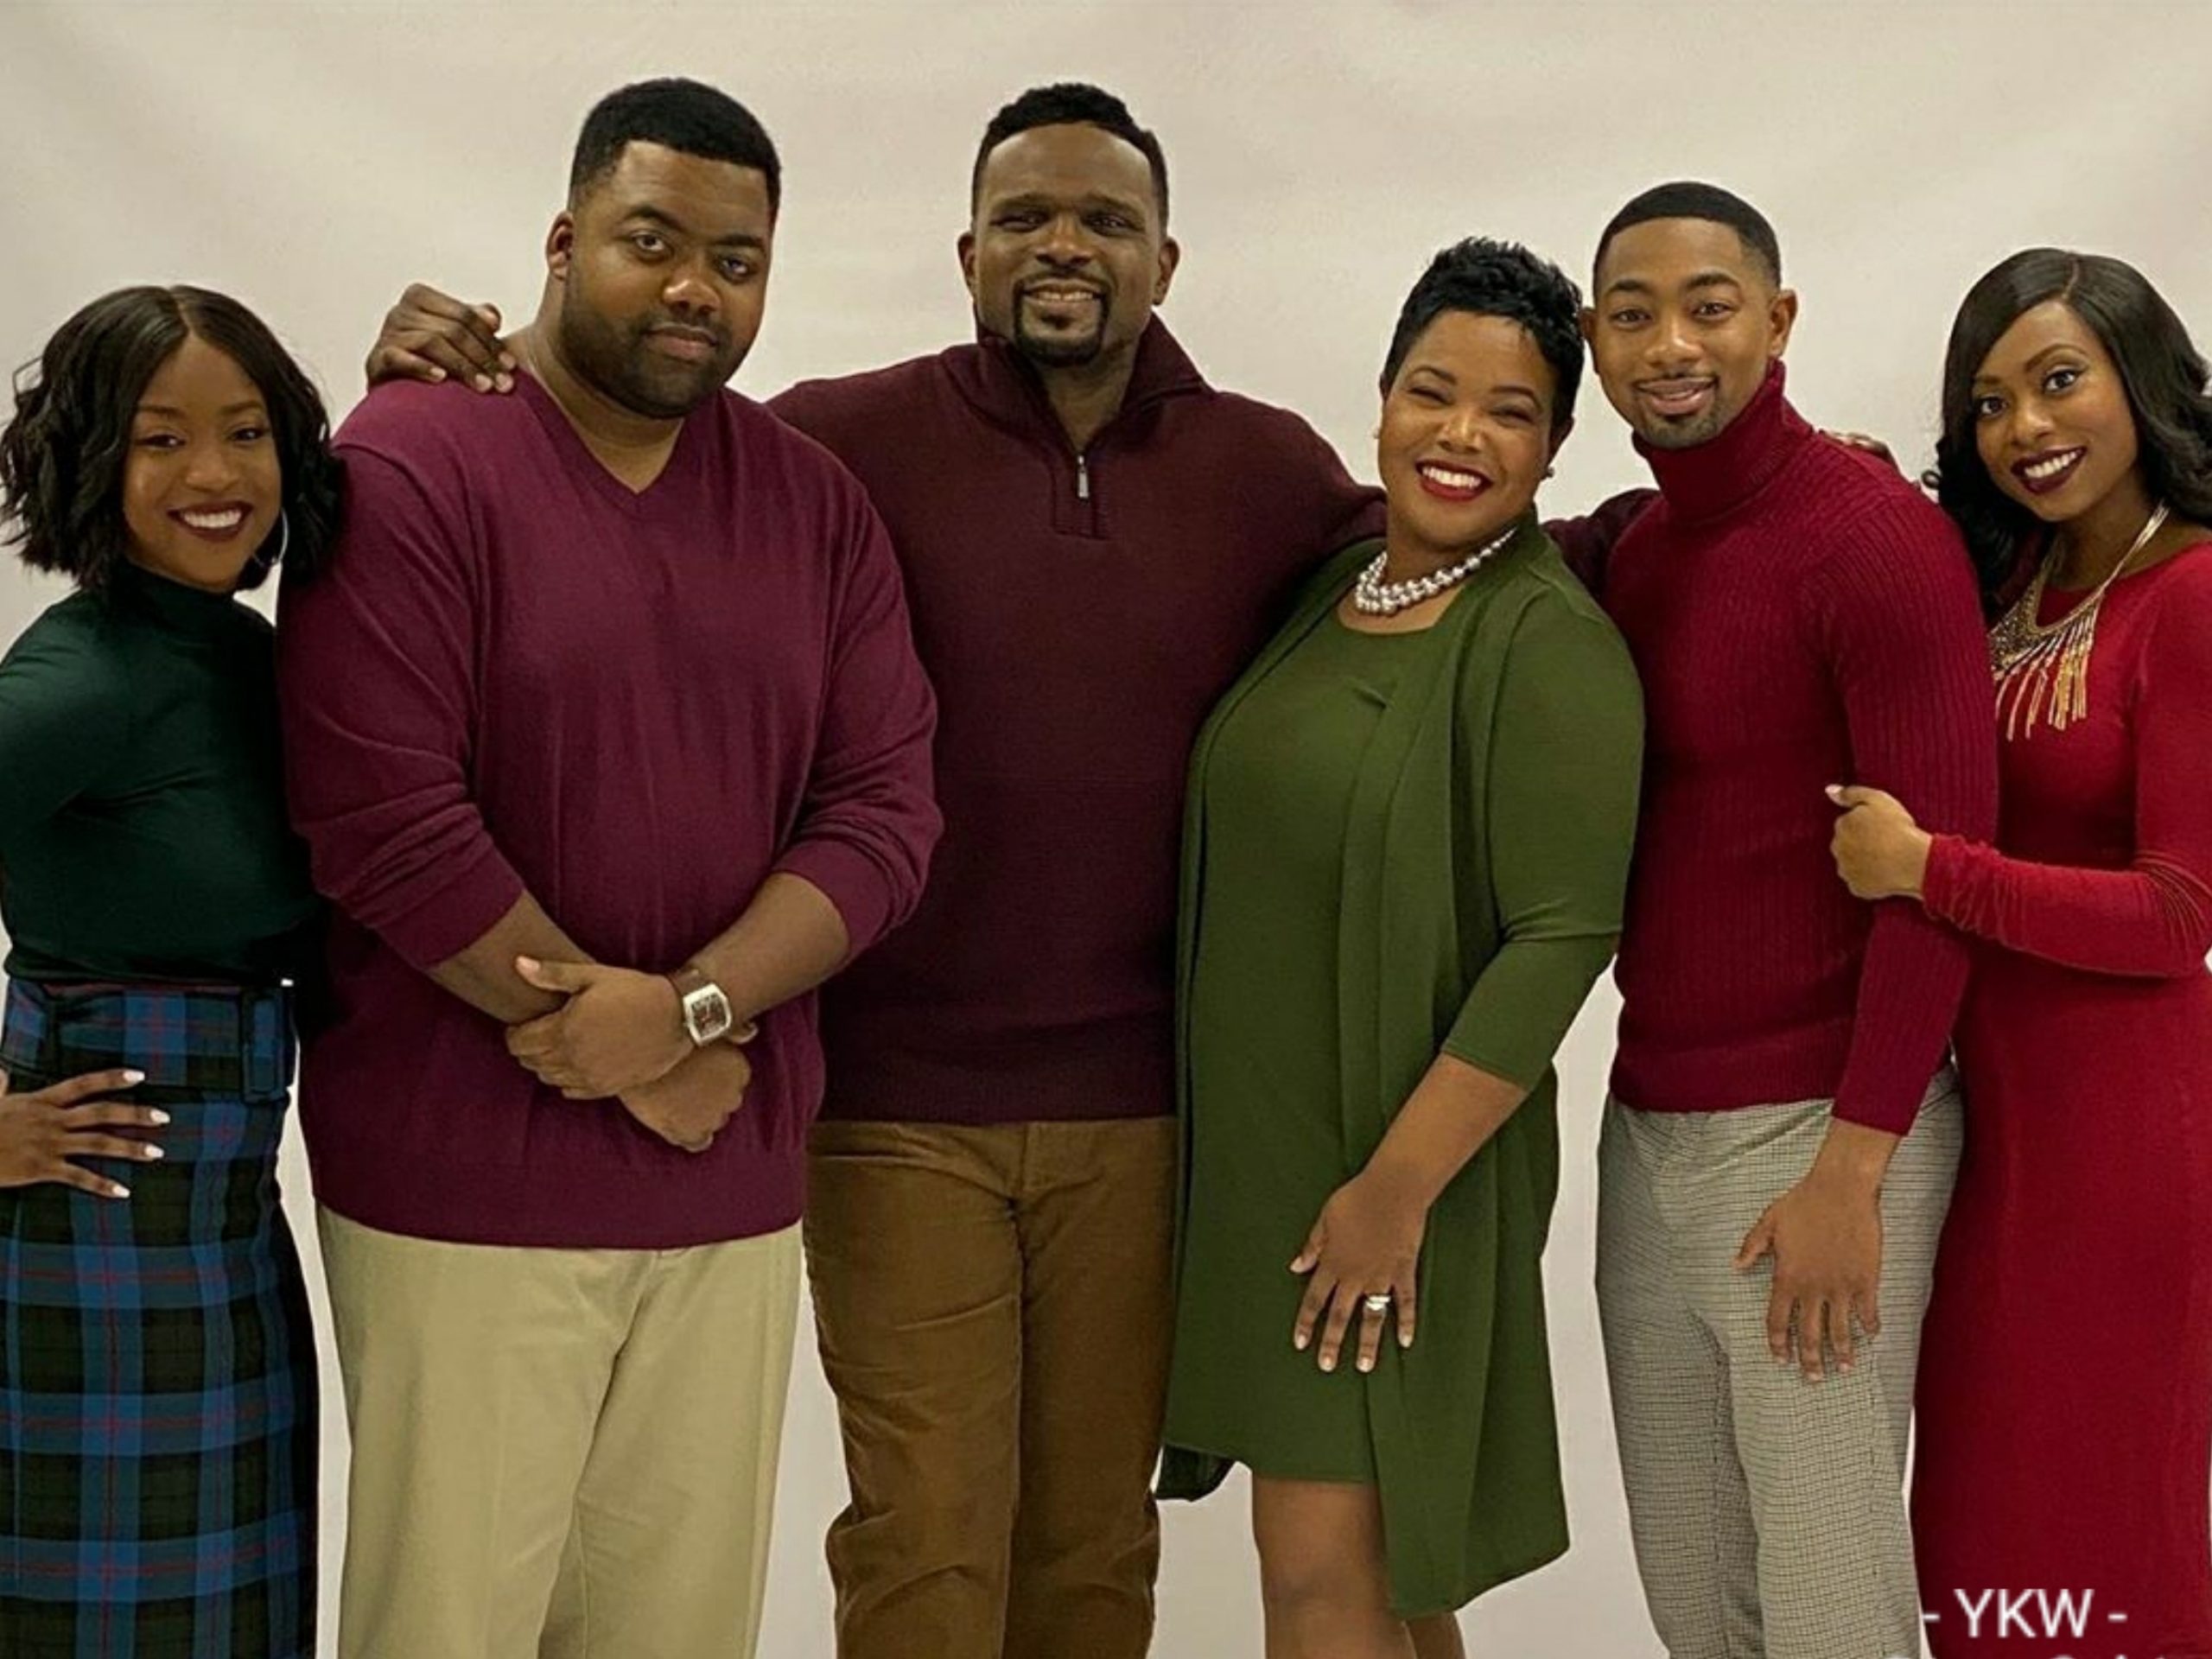 “Family Matters” Stars Reunite To Play Siblings Again In New Christmas Movie